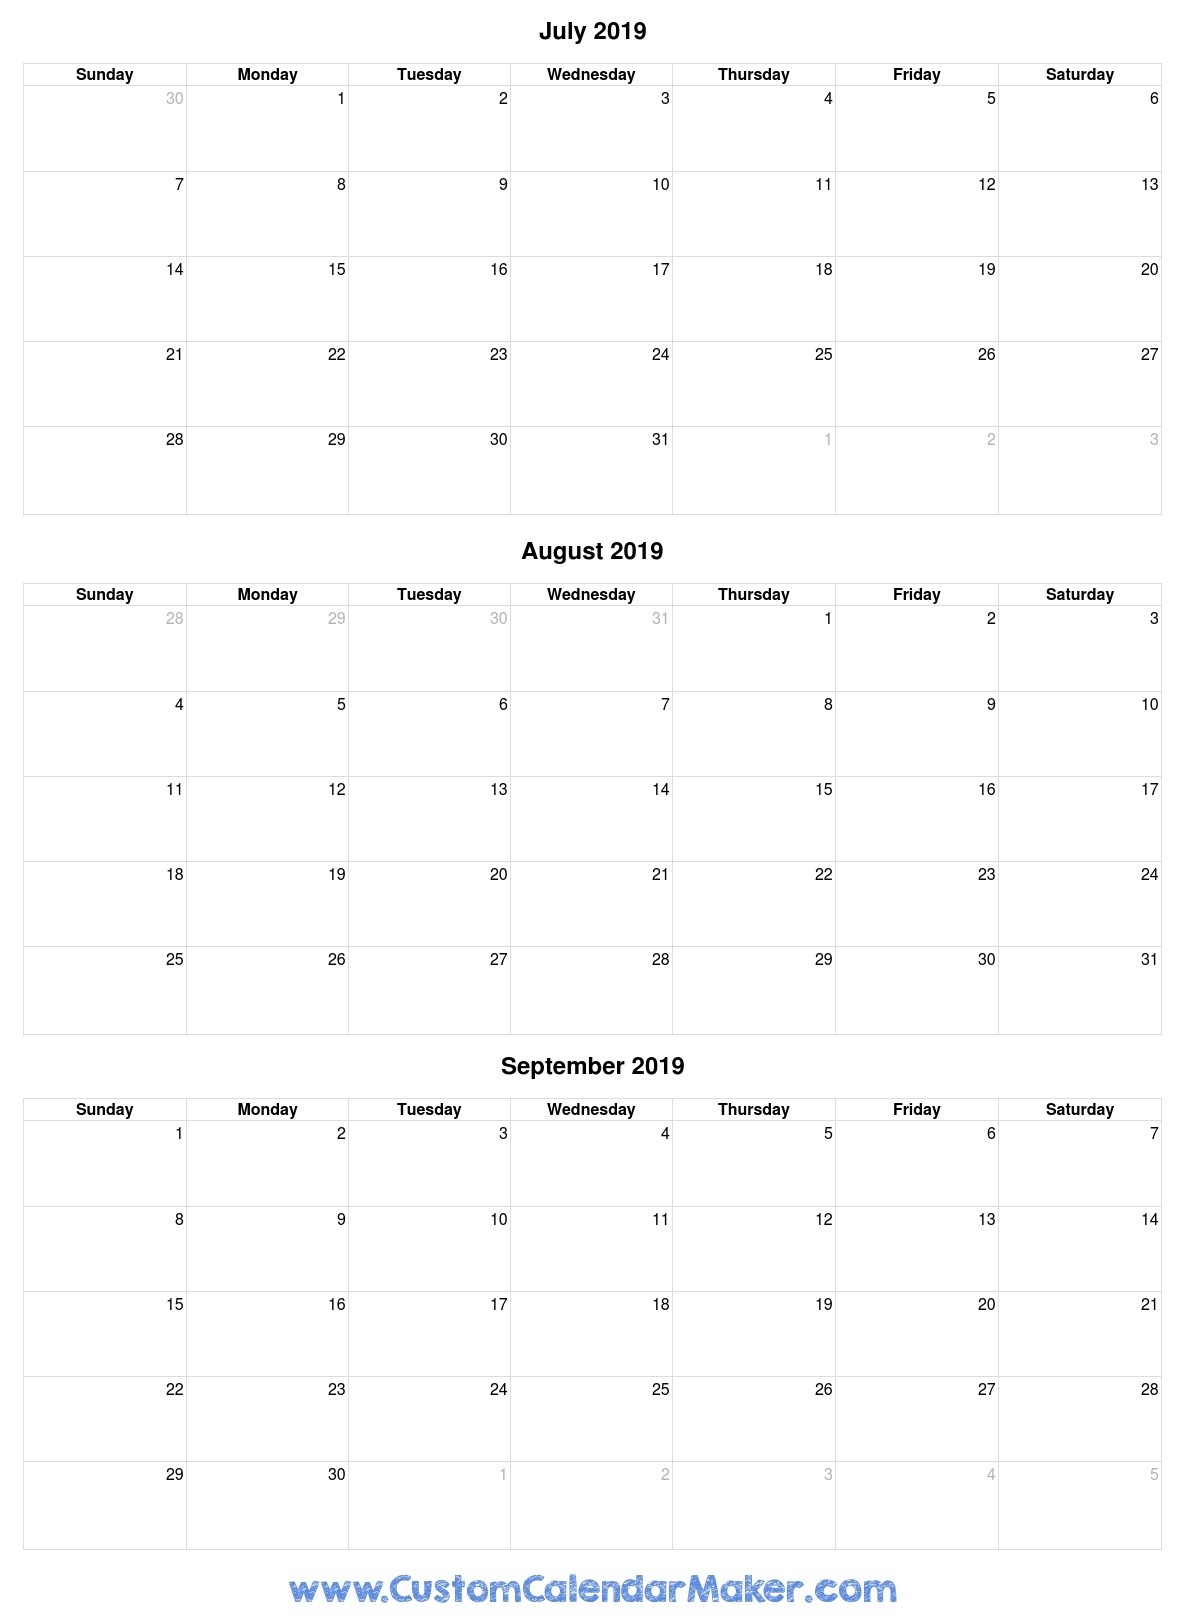 July To September 2019 Calendar - Free Printable Template-June July August Templates